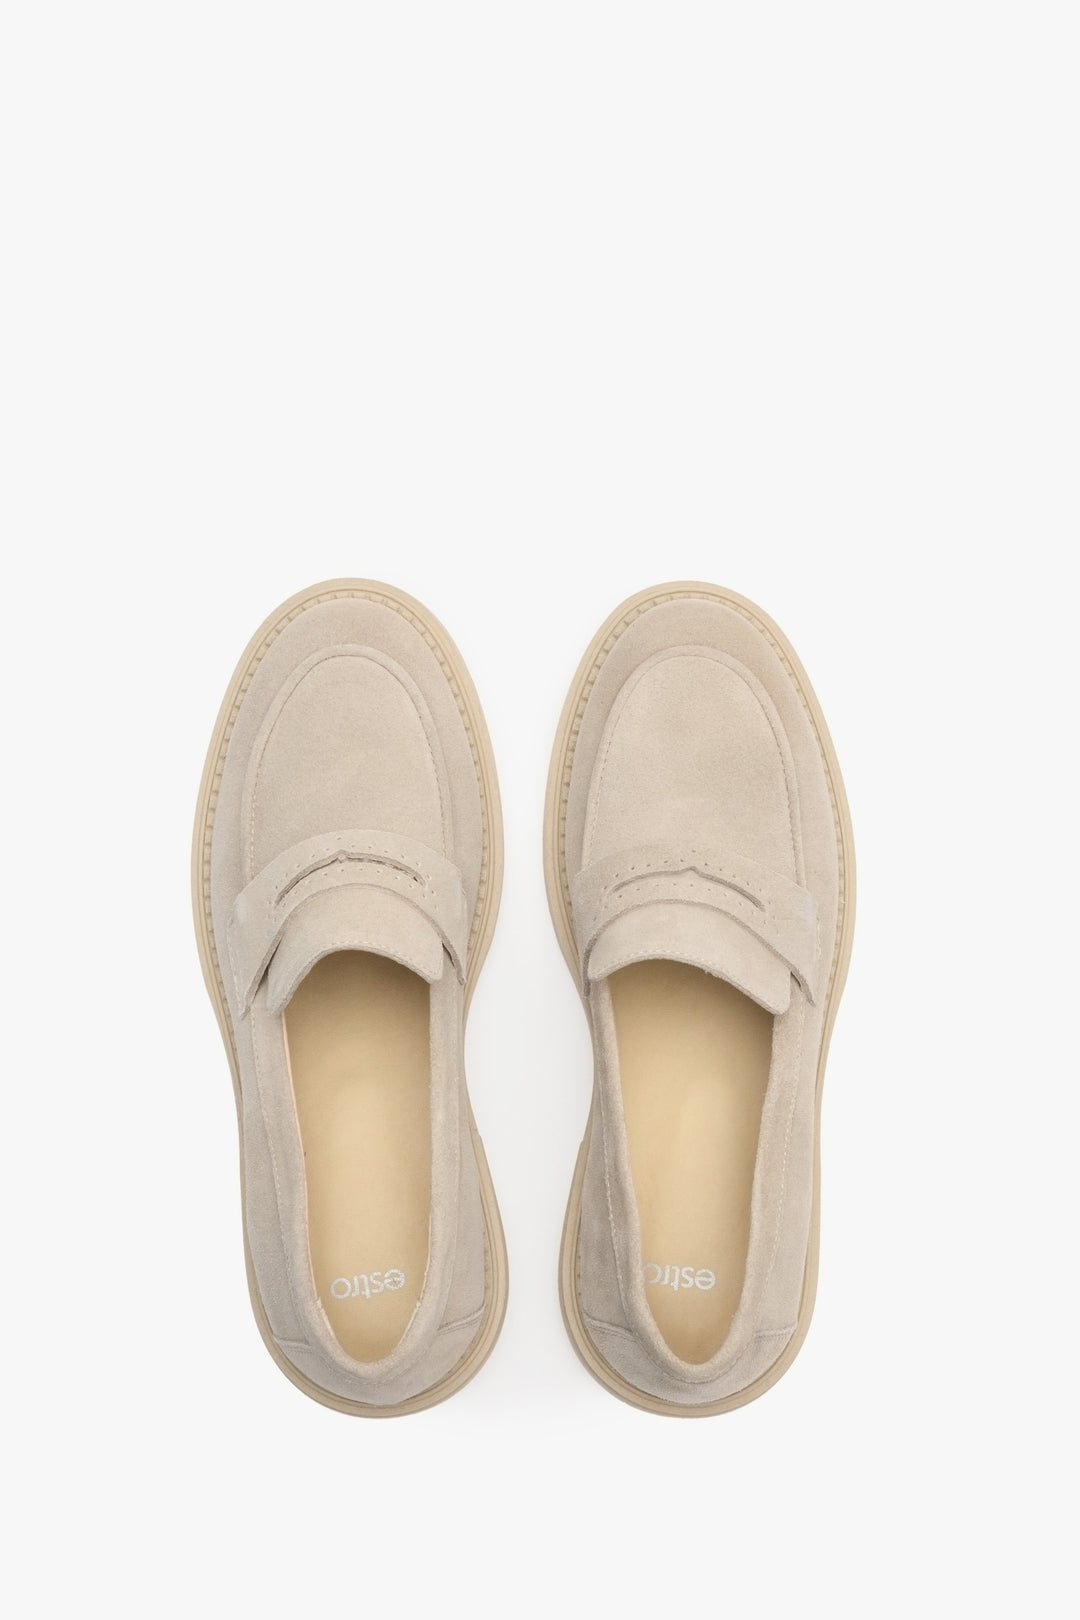 Beige suede loafers for women Estro - presentation of the model from above.